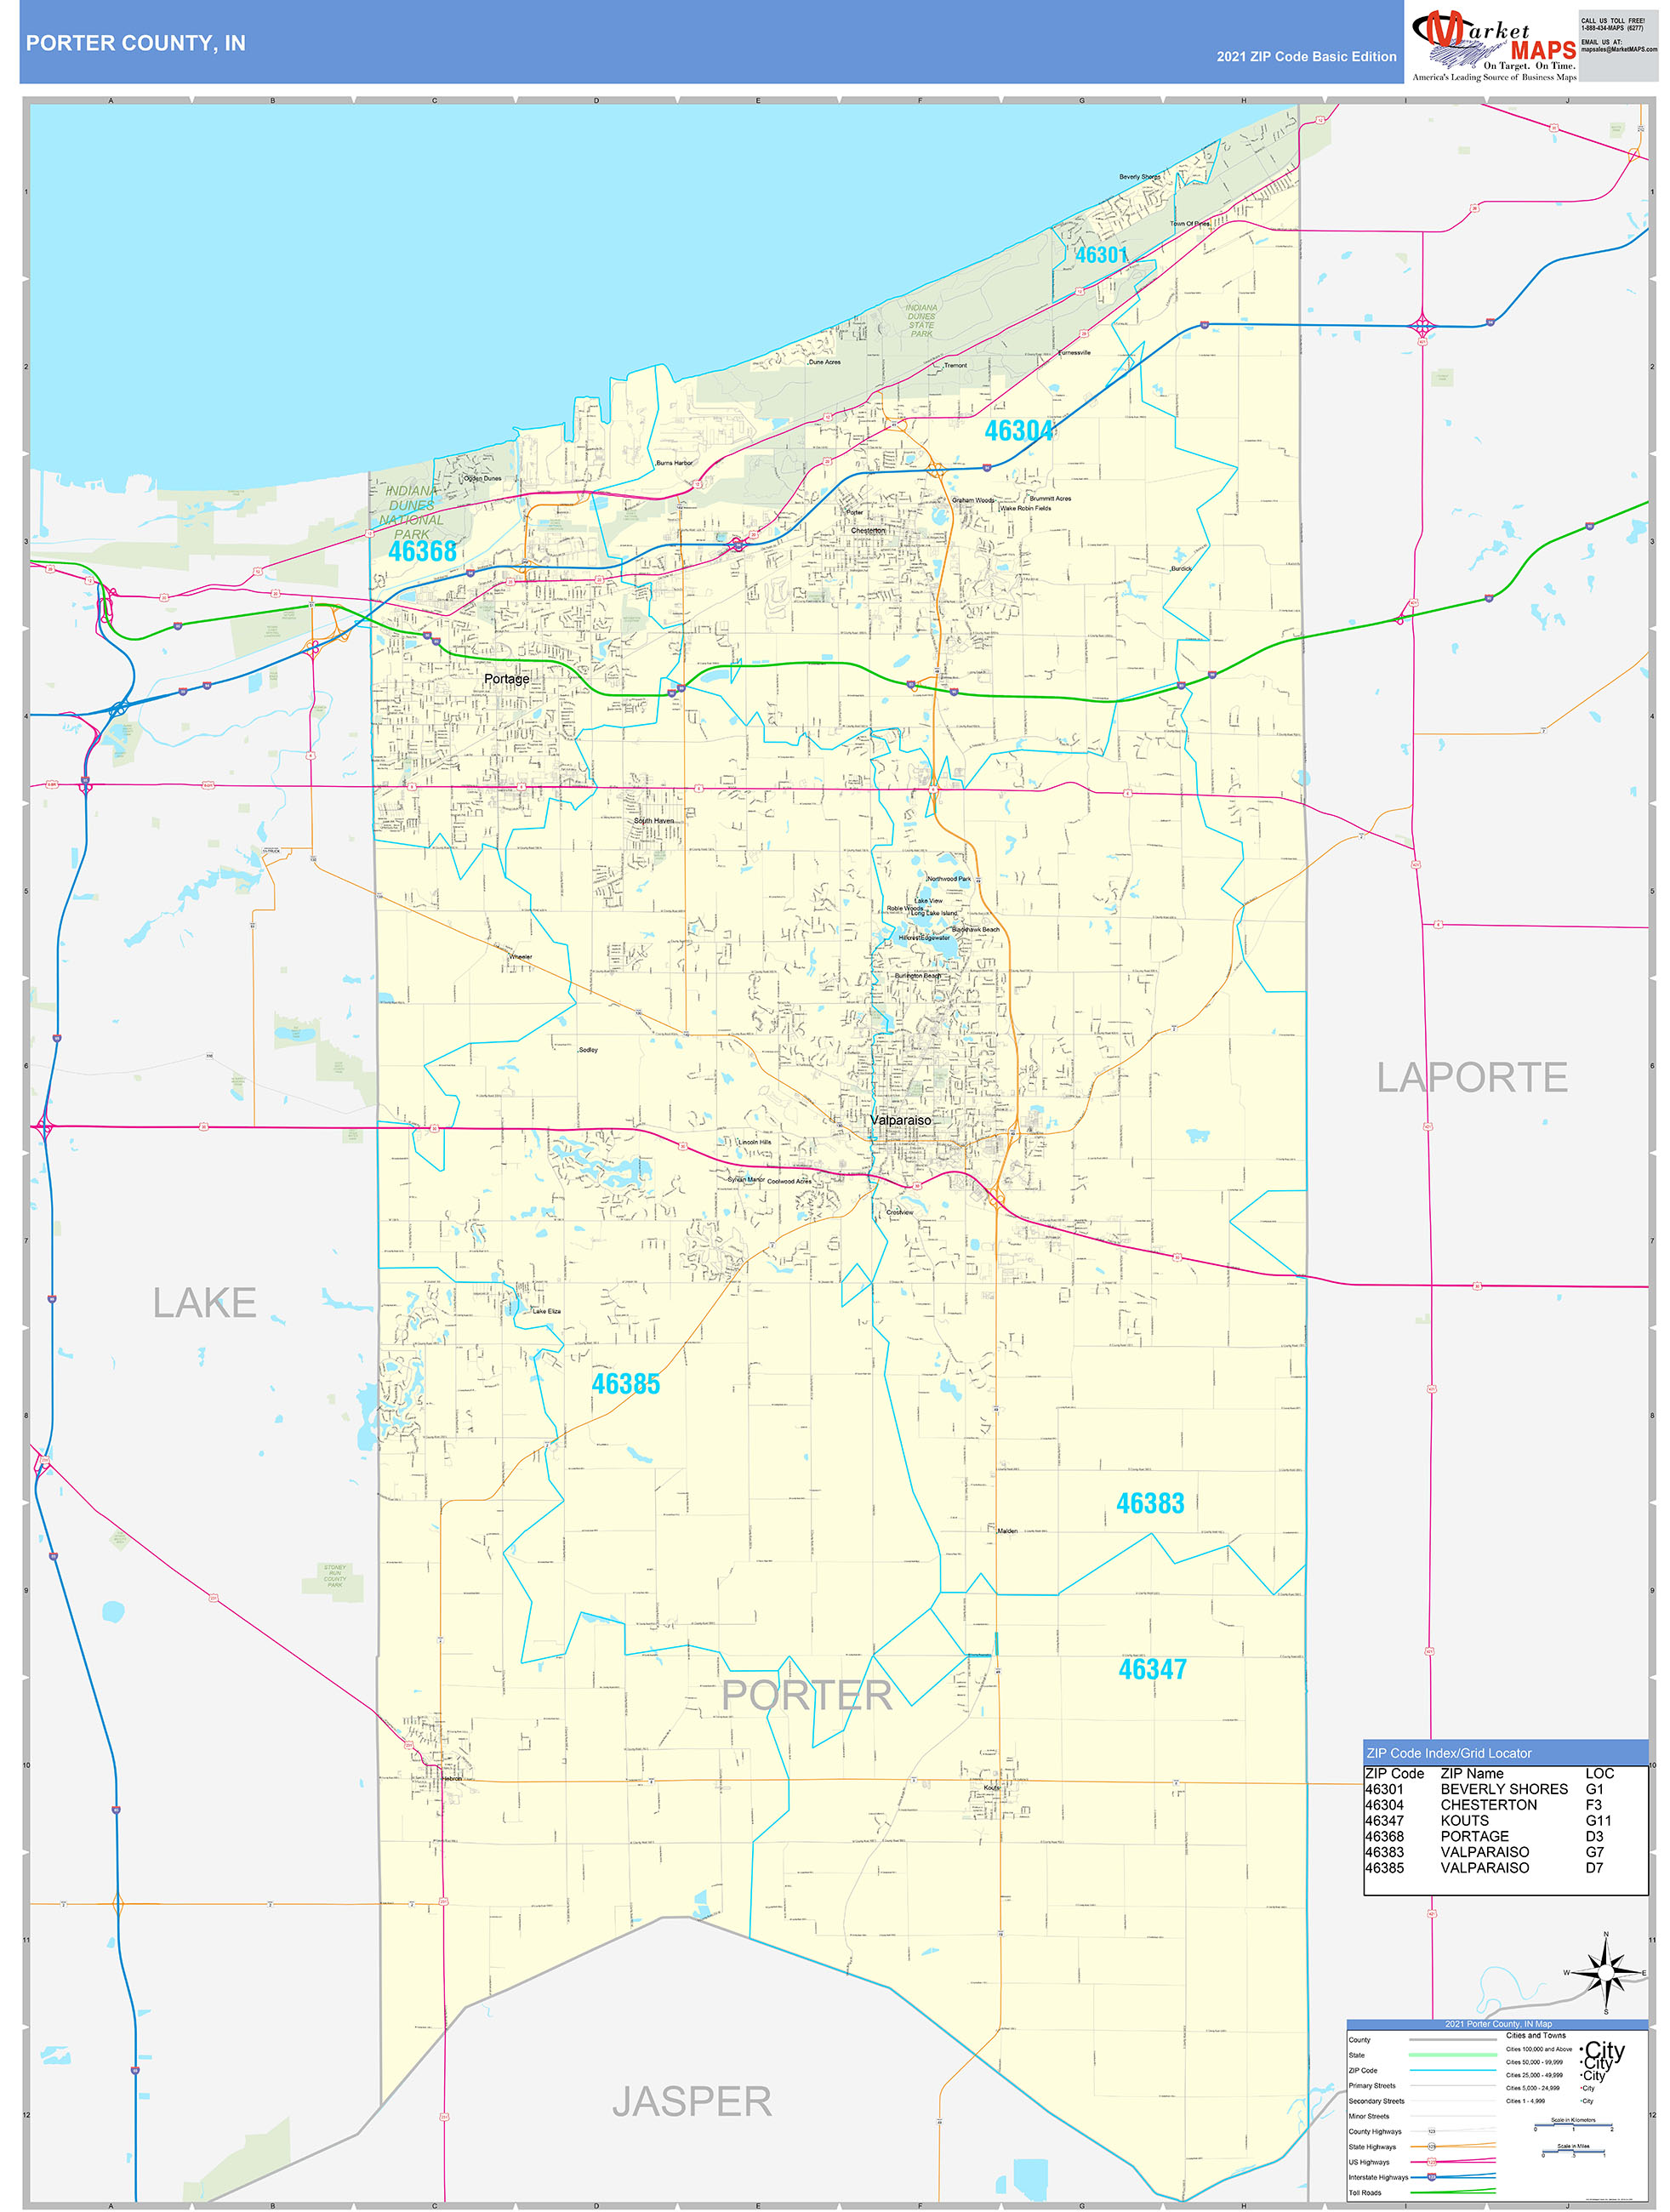 Porter County, IN Zip Code Wall Map Basic Style by MarketMAPS MapSales